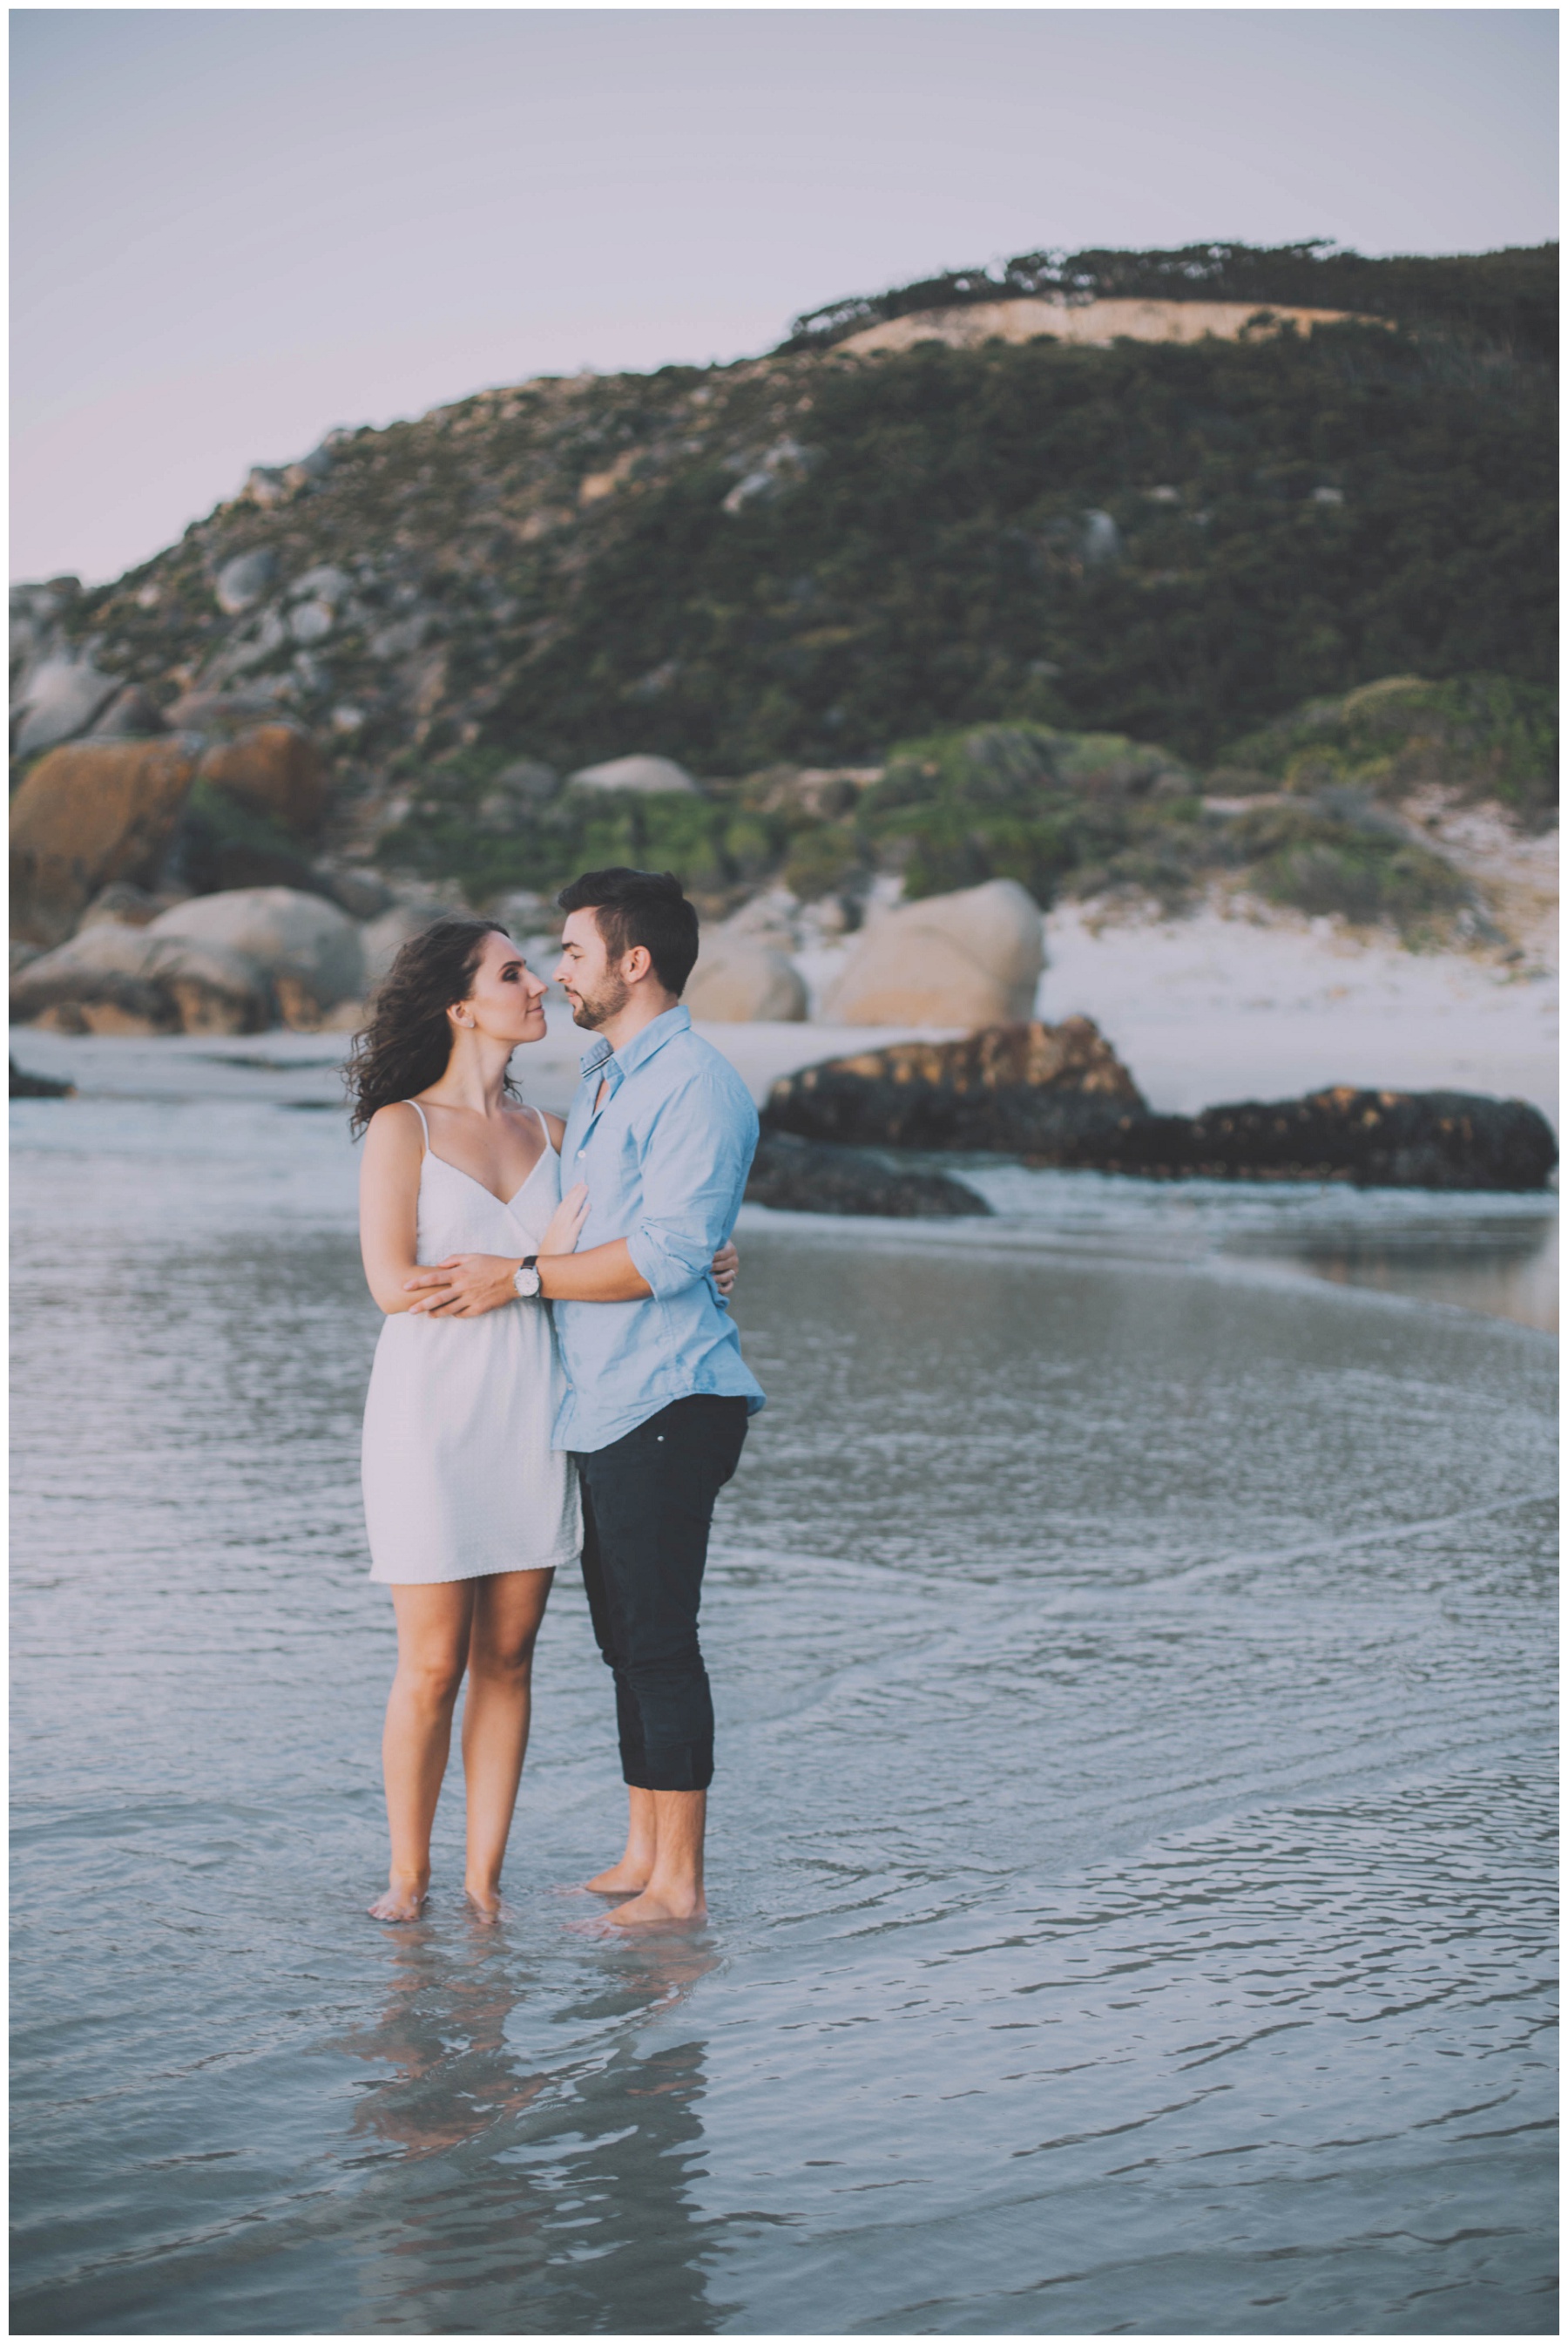 Ronel Kruger Cape Town Wedding and Lifestyle Photographer_8493.jpg